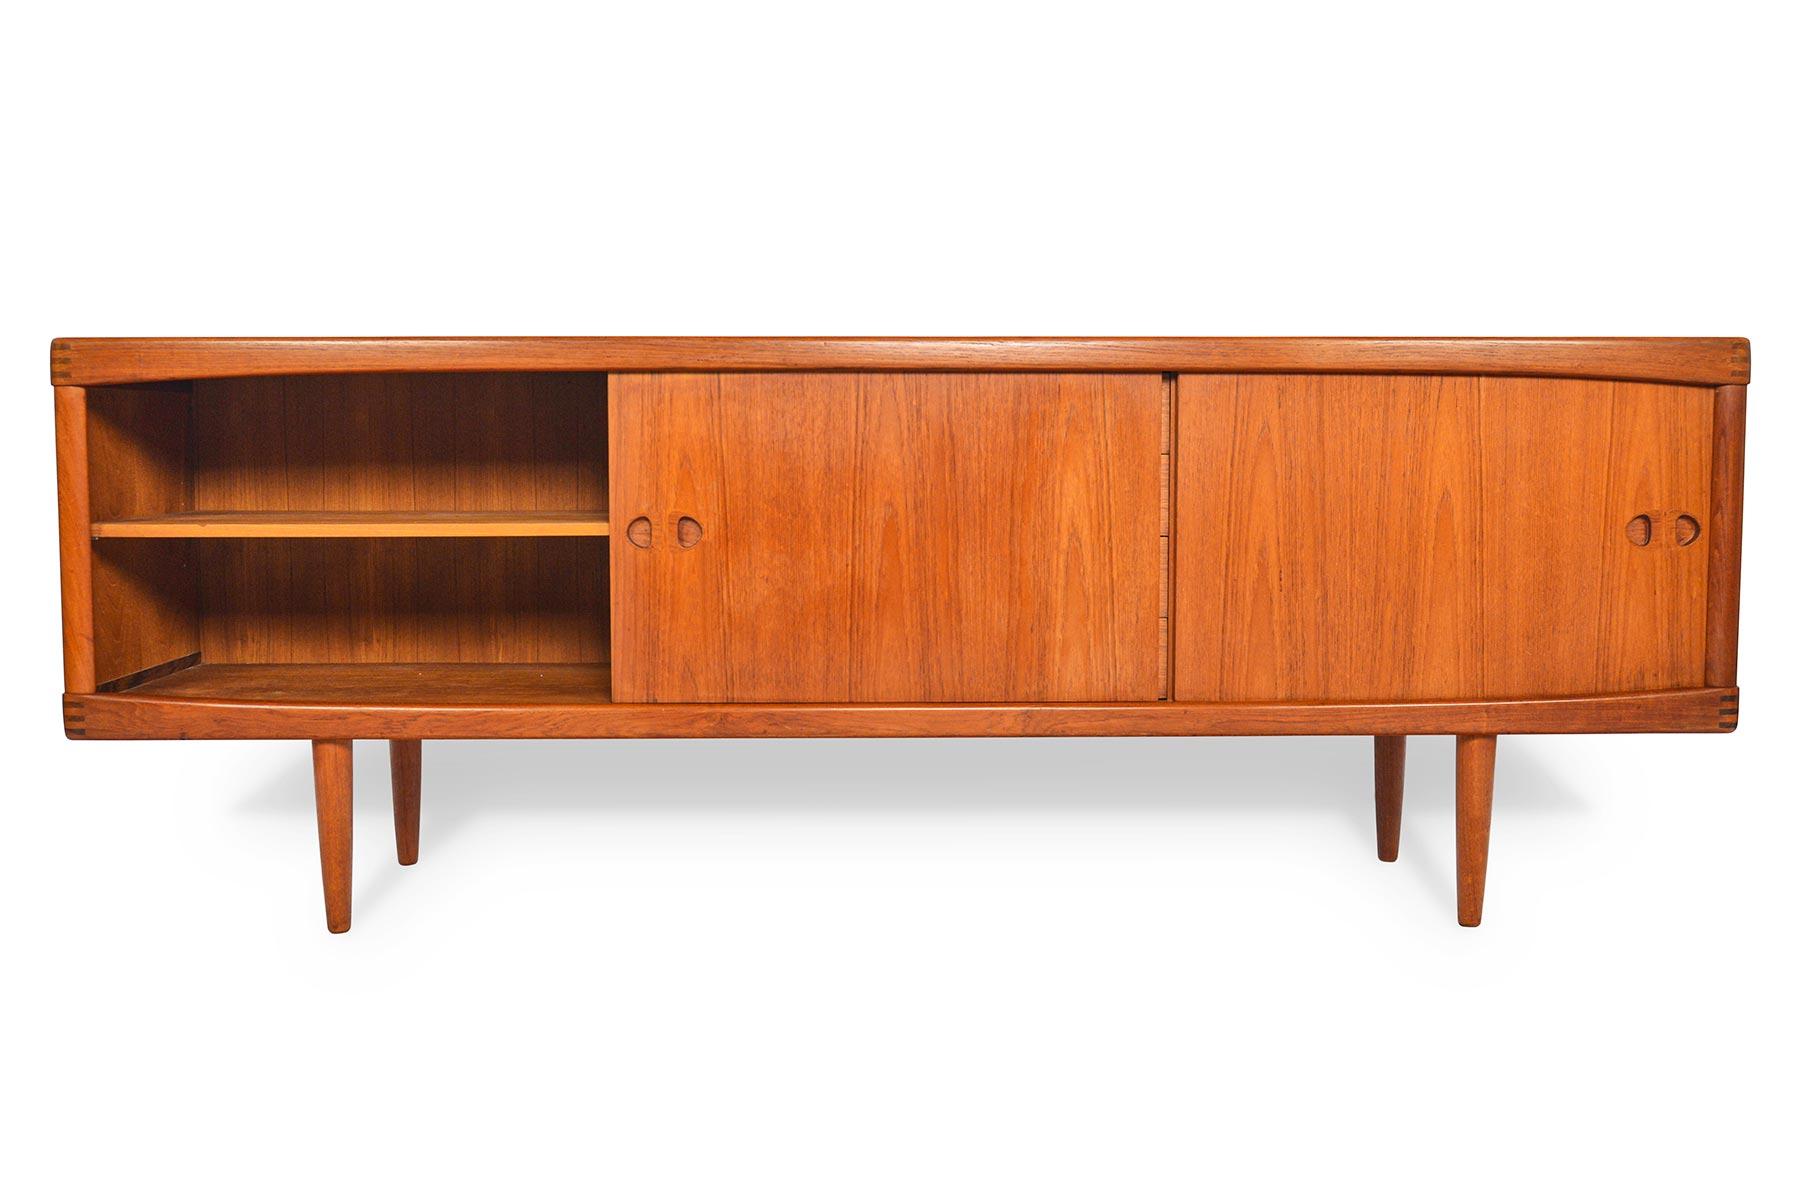 This breathtaking Danish modern midcentury teak credenza was designed by H.W. Klein and manufactured by Bramin in the 1960s. Left and right doors slide open to reveal adjustable shelving. Four center drawers provide additional storage. All doors and